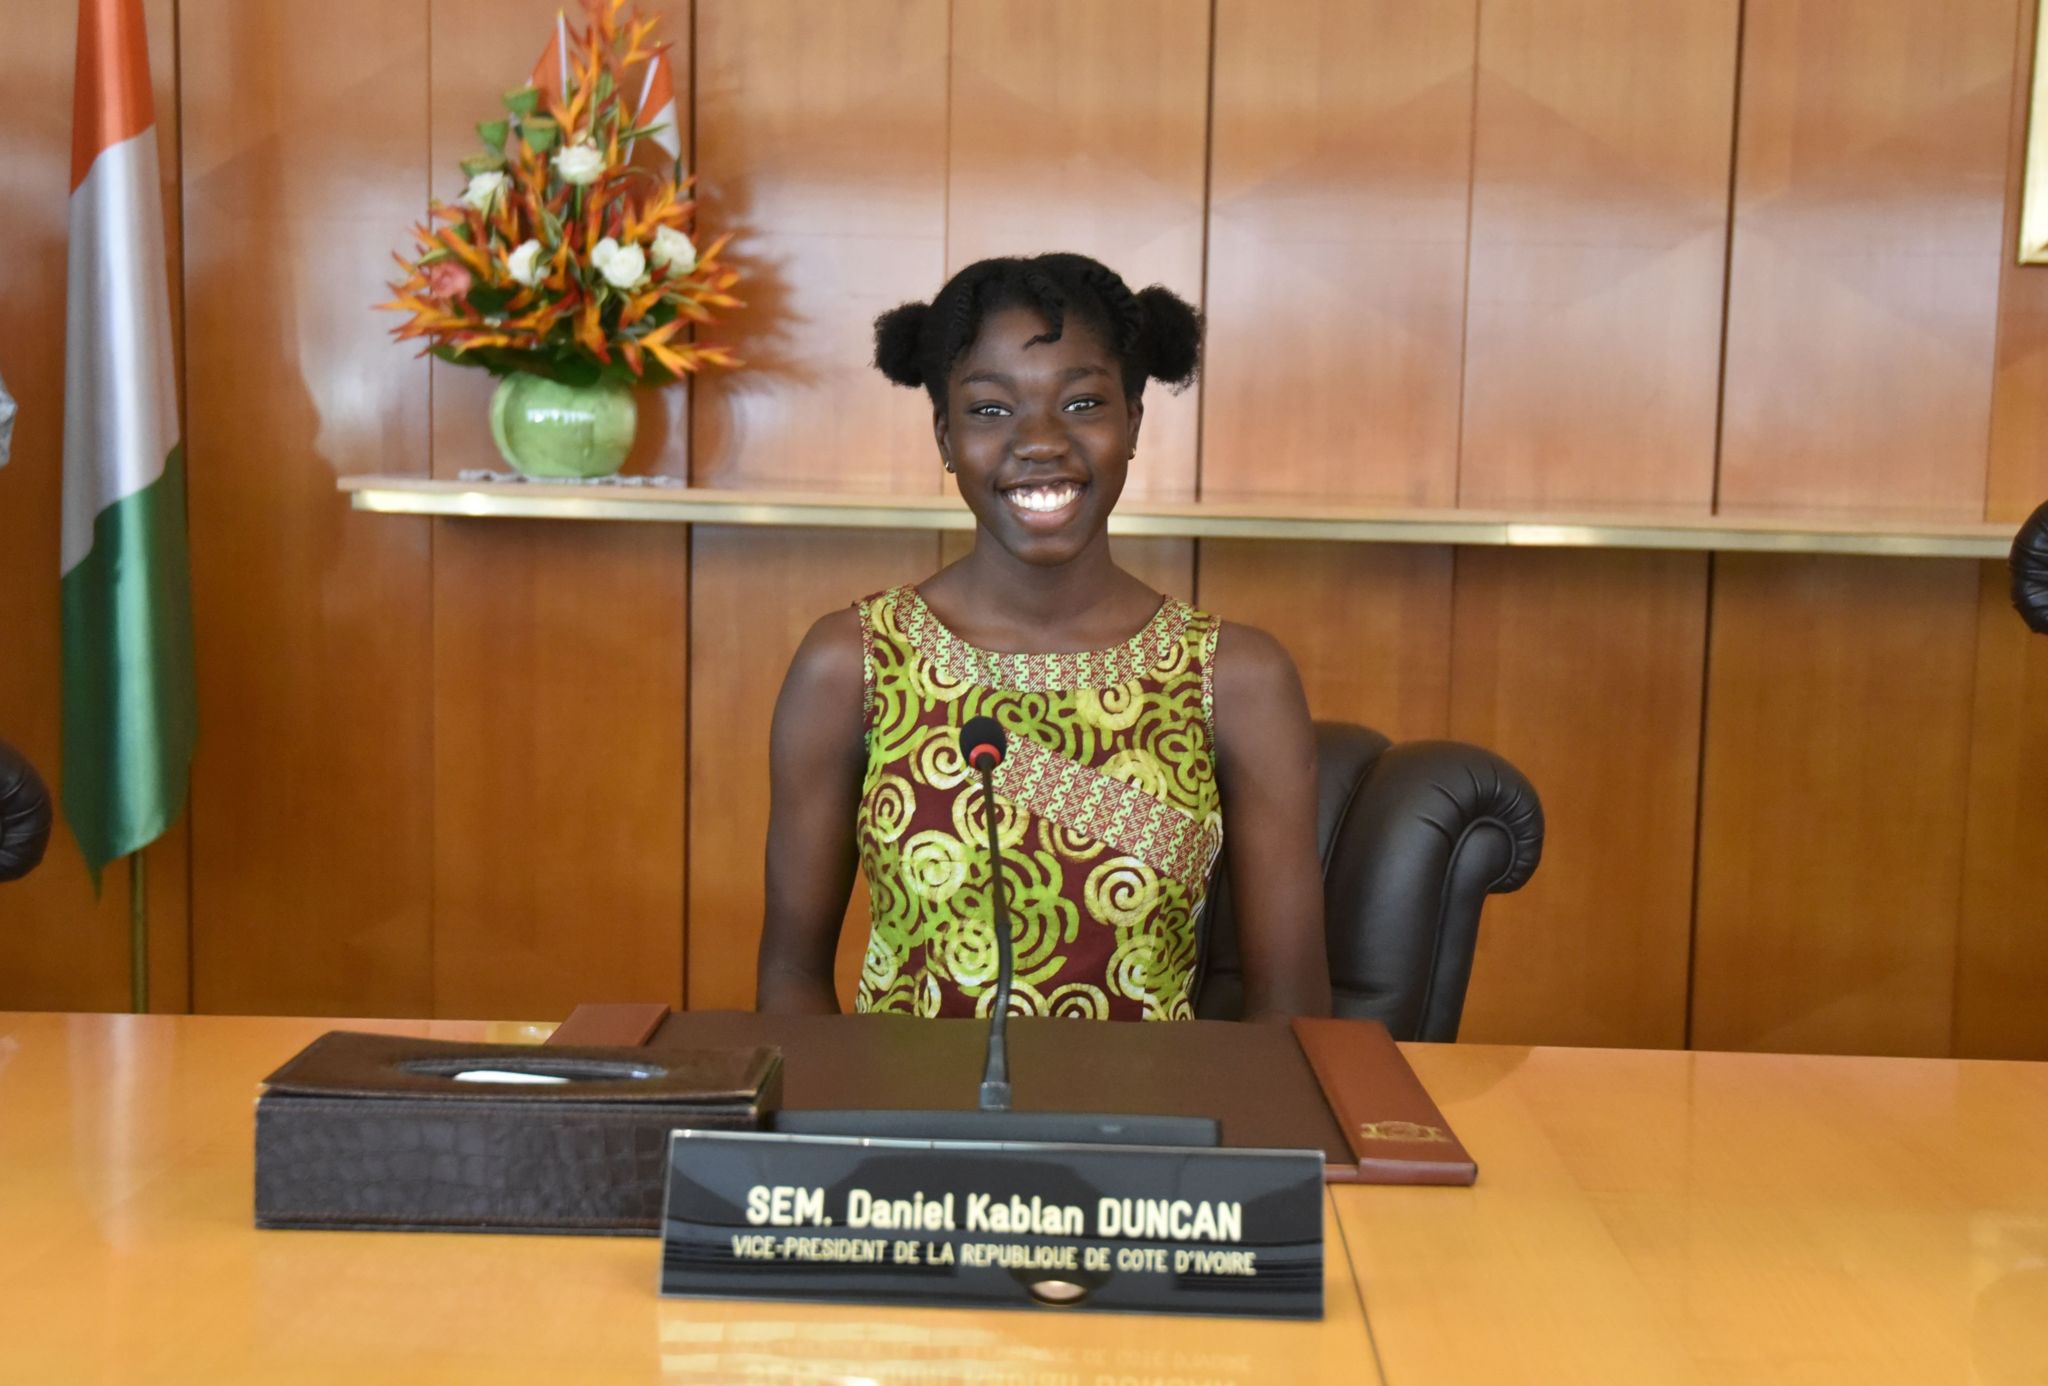 One of the 51 best Ivorian students of the school year 2016-2017, seated in the place of Ivorian vice president Daniel Kablan Duncan during the first visit to the Cabinet room at the presidential palace in Abidjan.